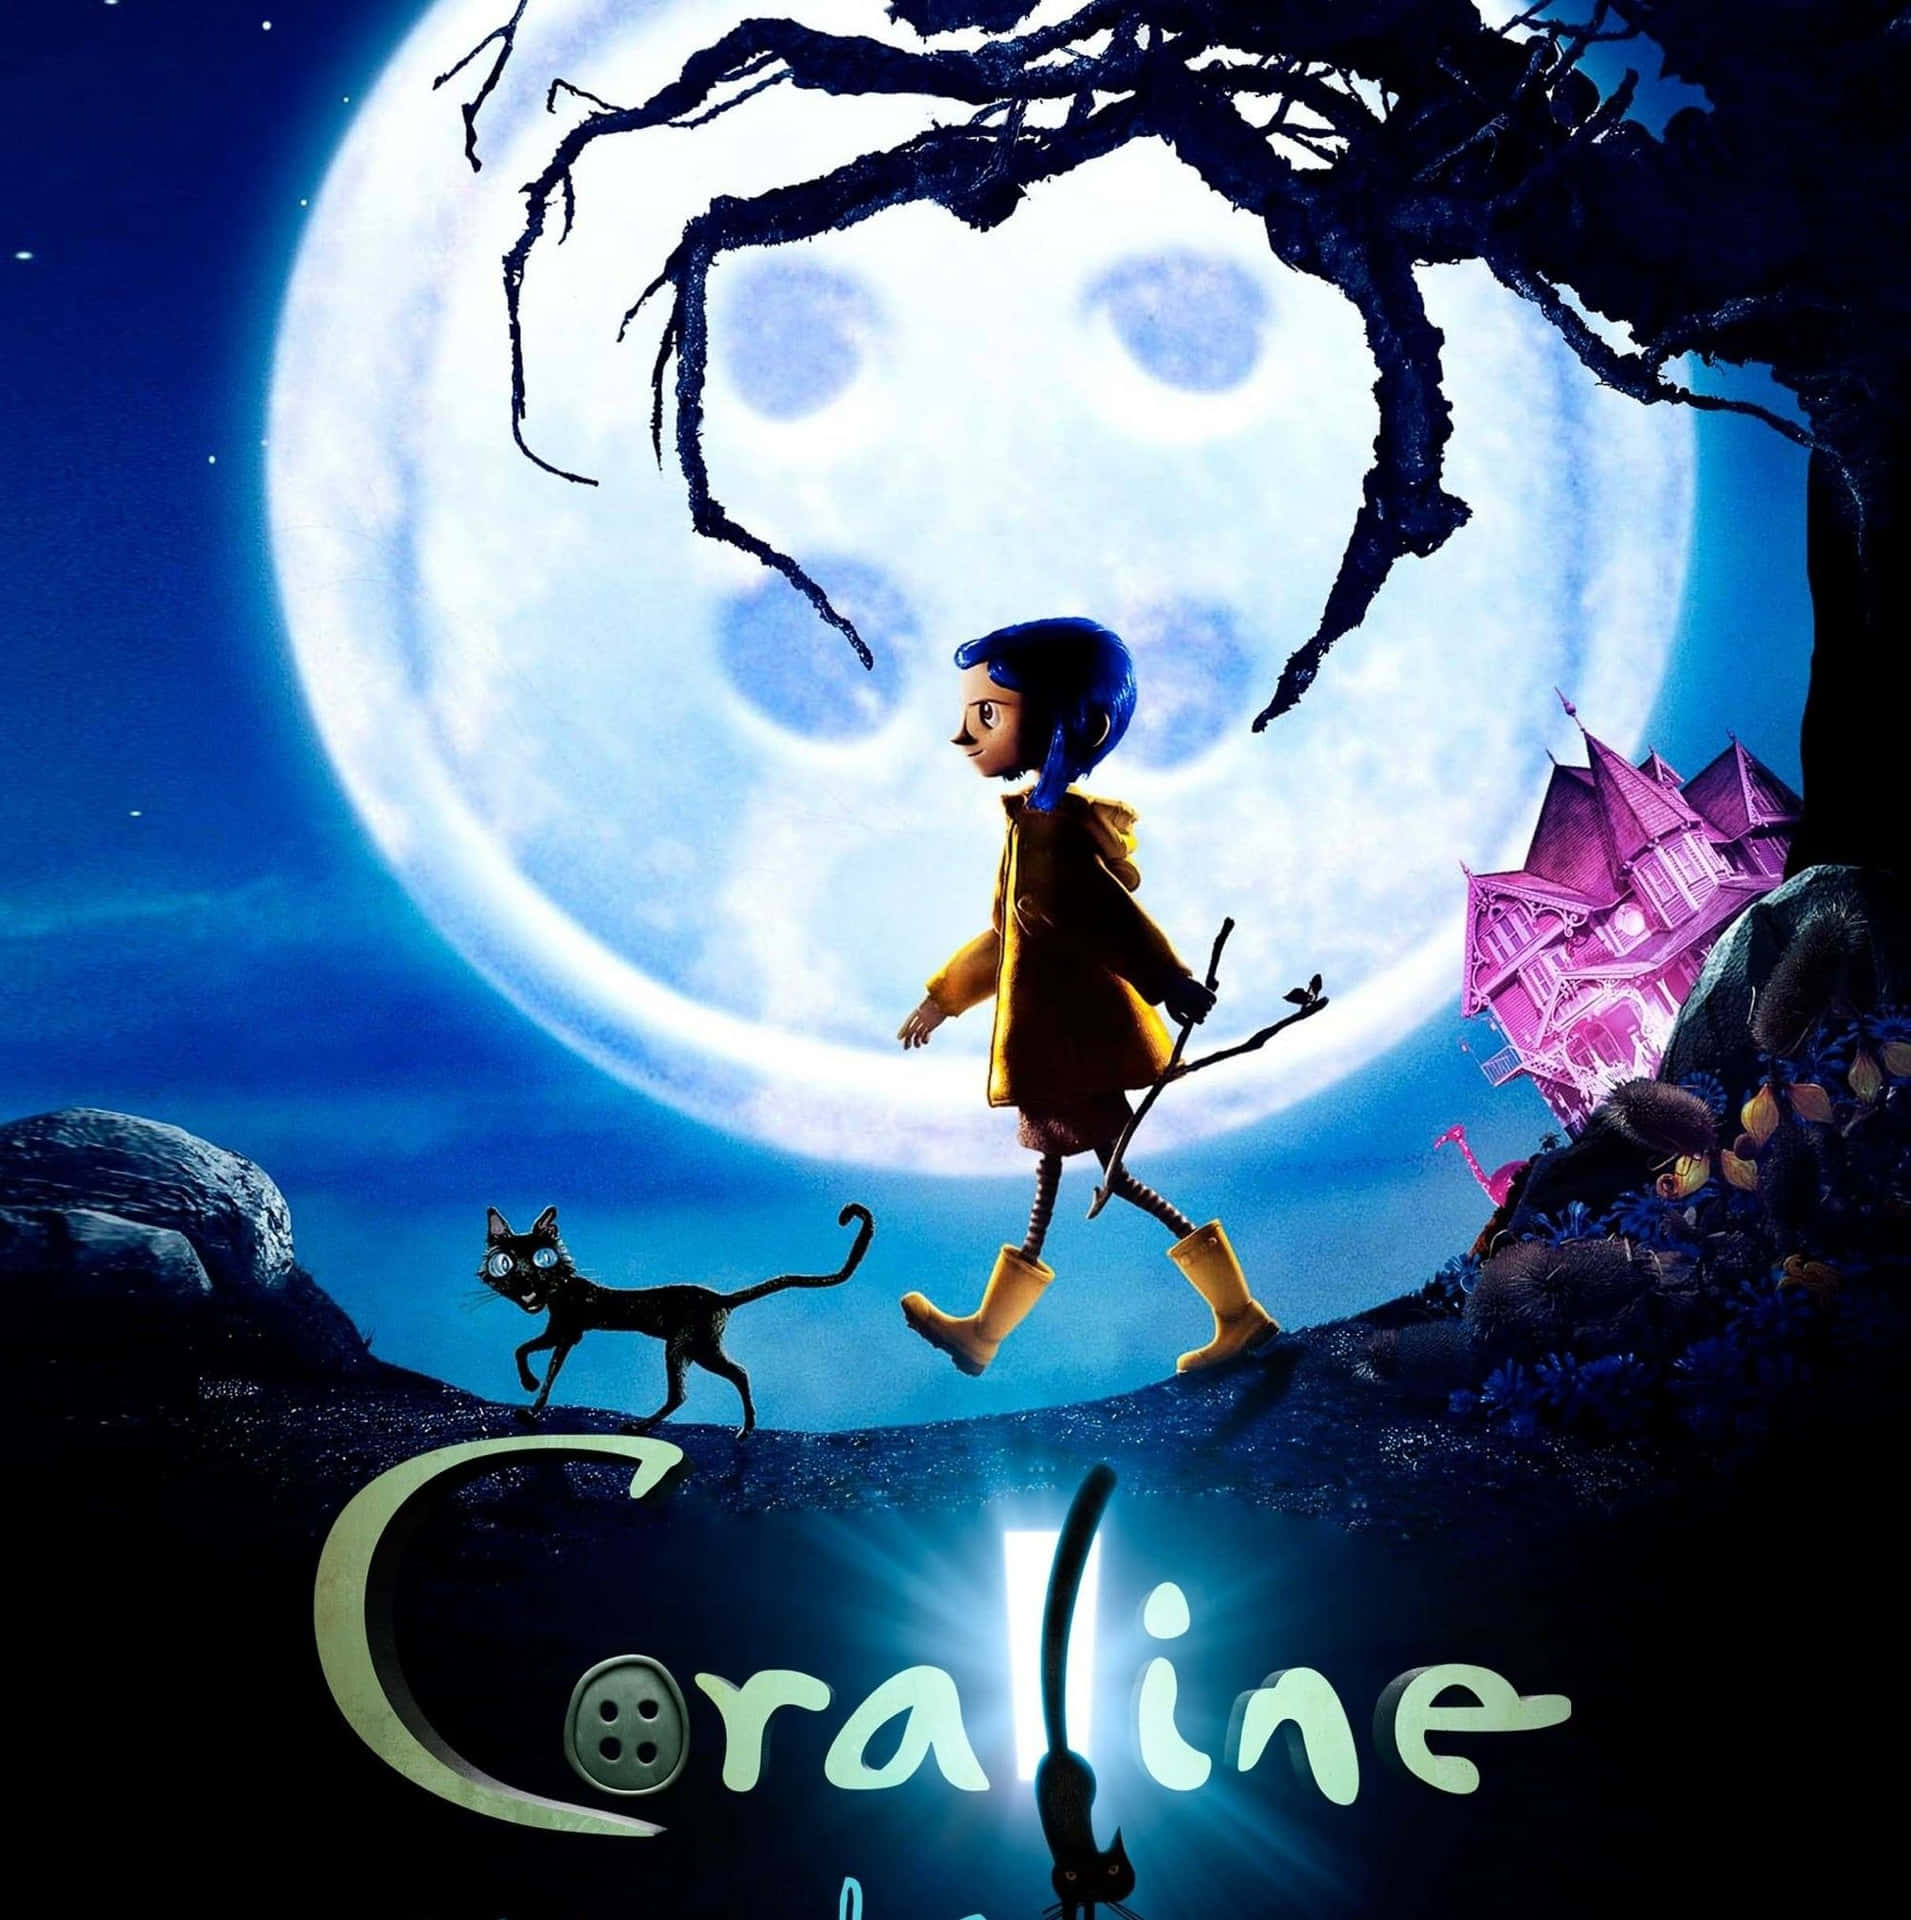 Coraline's journey of discovery